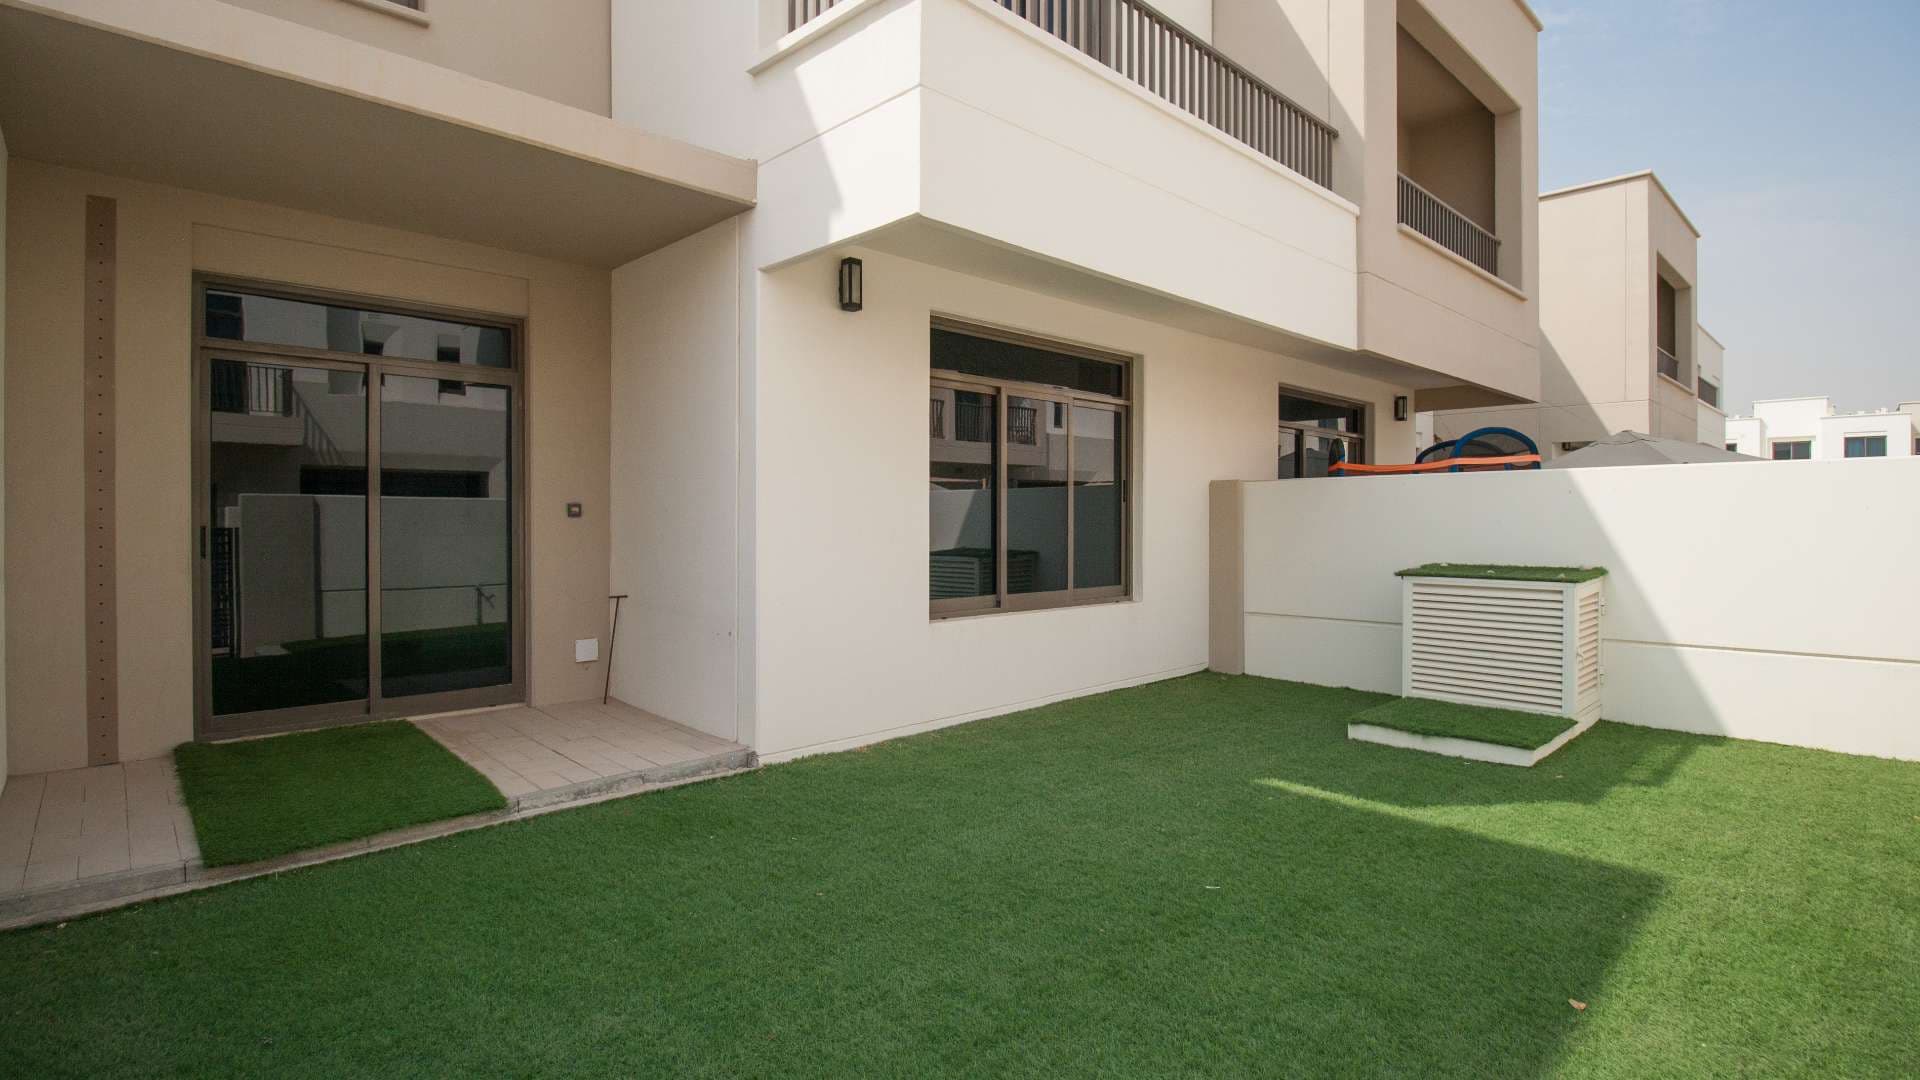 3 Bedroom Townhouse For Sale Hayat Townhouses Lp07591 377bfe4352cad00.jpg